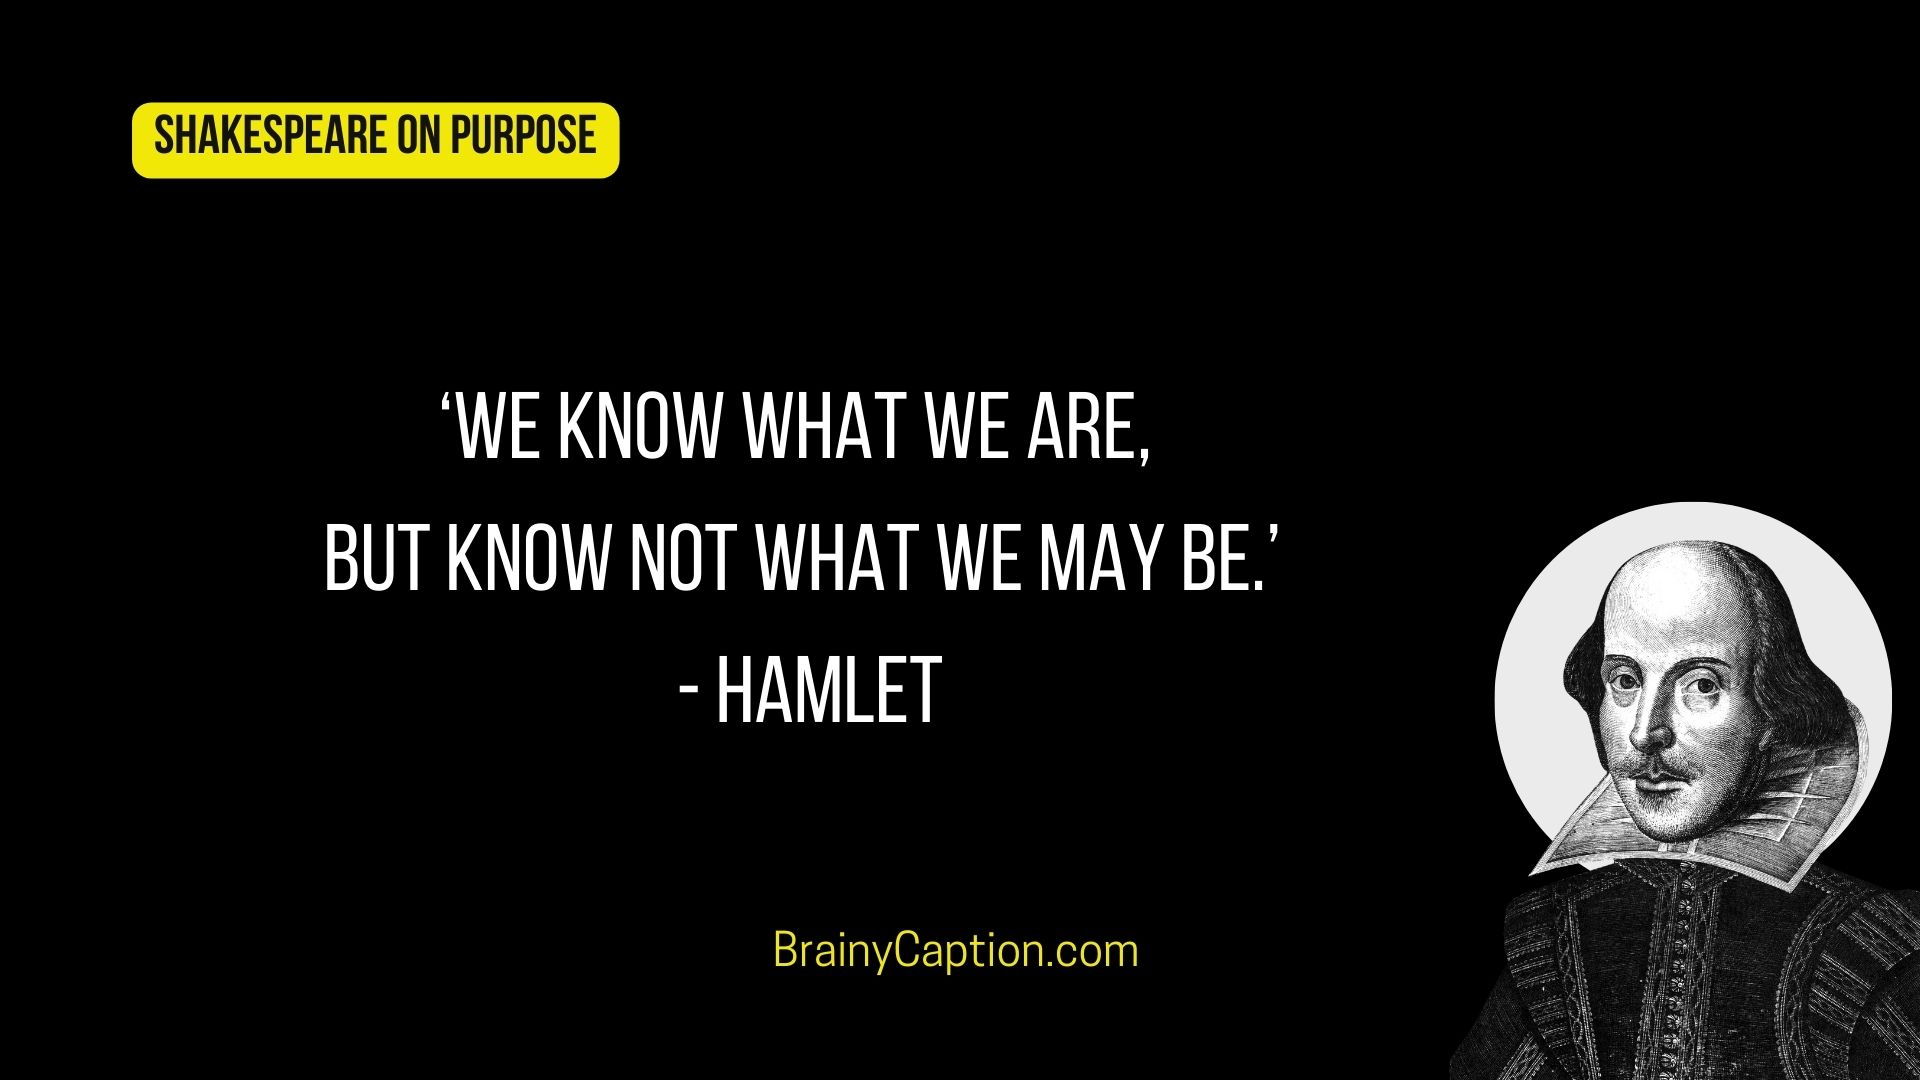 Shakespeare quotes on purpose from Hamlet